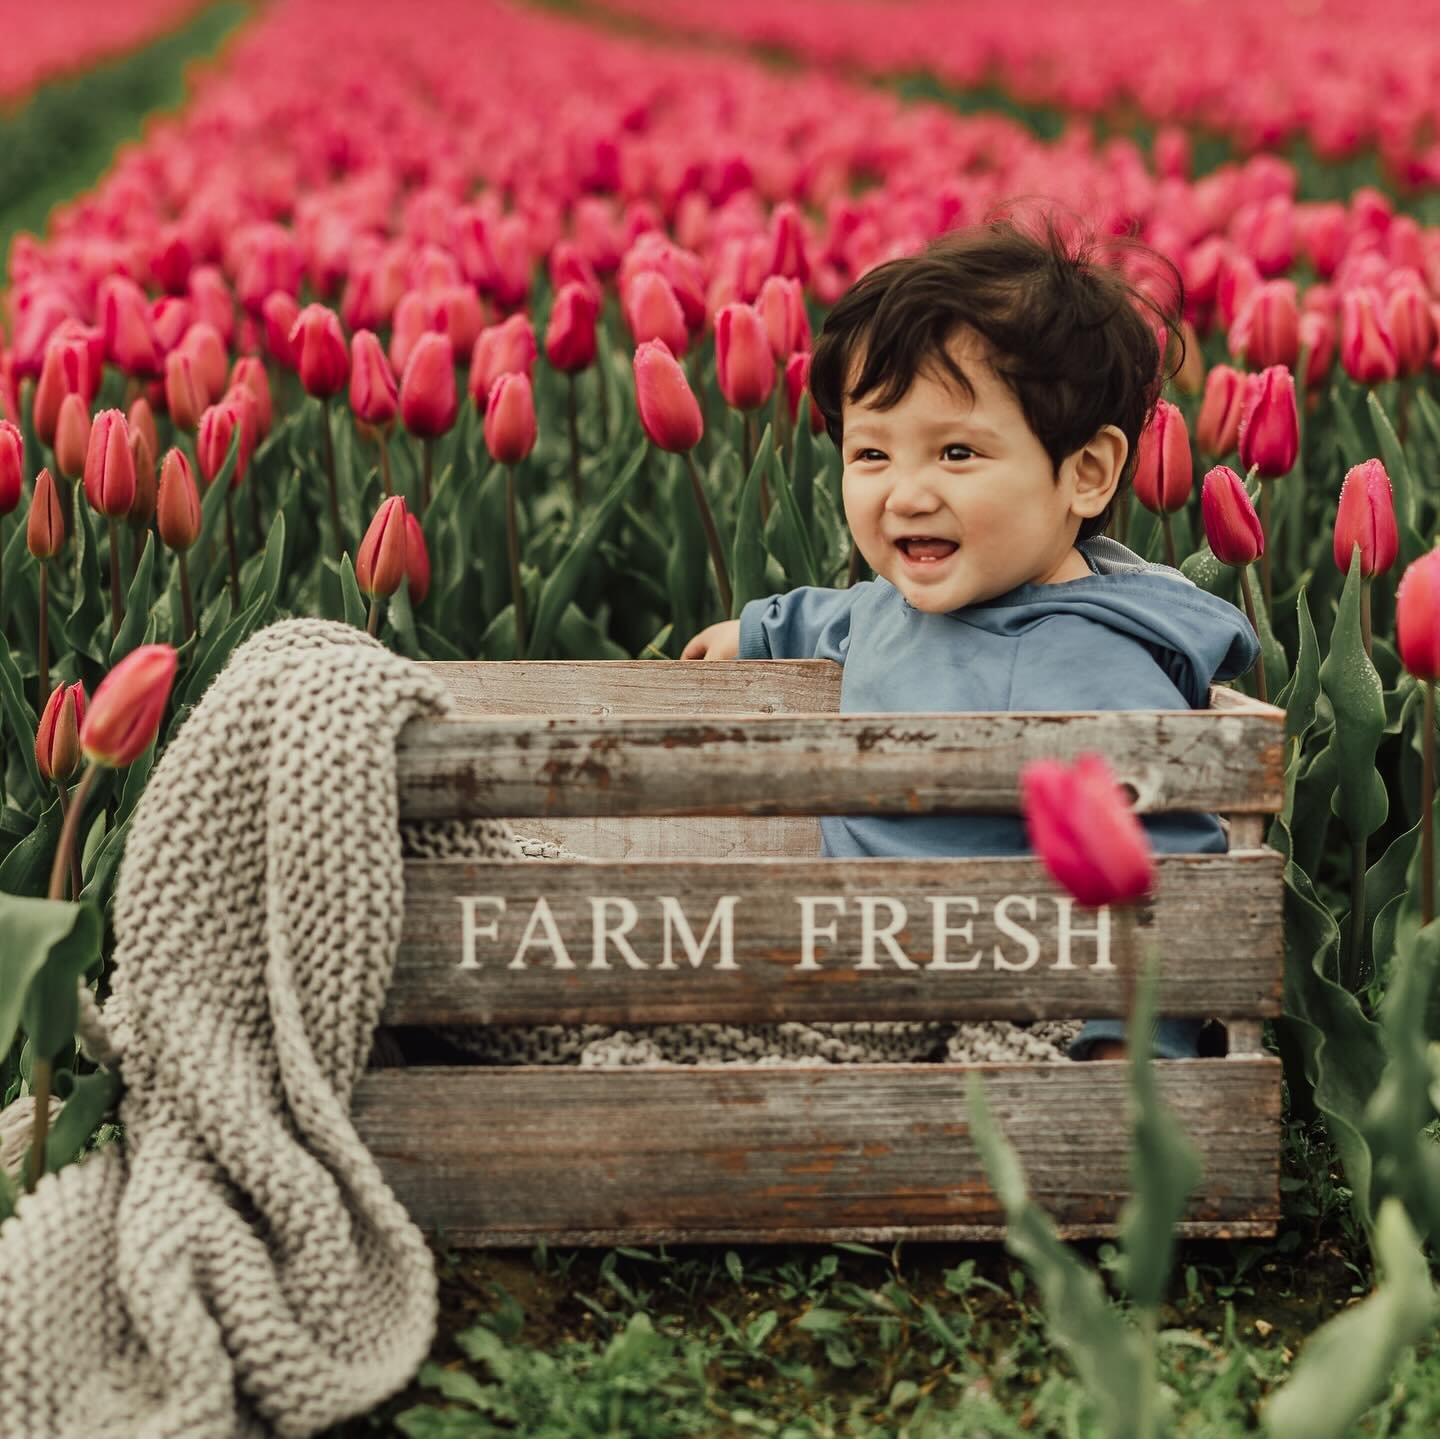 Little Levi enjoyed his first visit to the Skagit Valley tulip fields. 
#skagitvalleytulipfestival #tulipfields #mtvernonwa #skagitvalley #skagitfamilyphotographer #snohomishfamilyphotographer #whatcomfamilyphotographer #bellinghamfamilyphotographer 